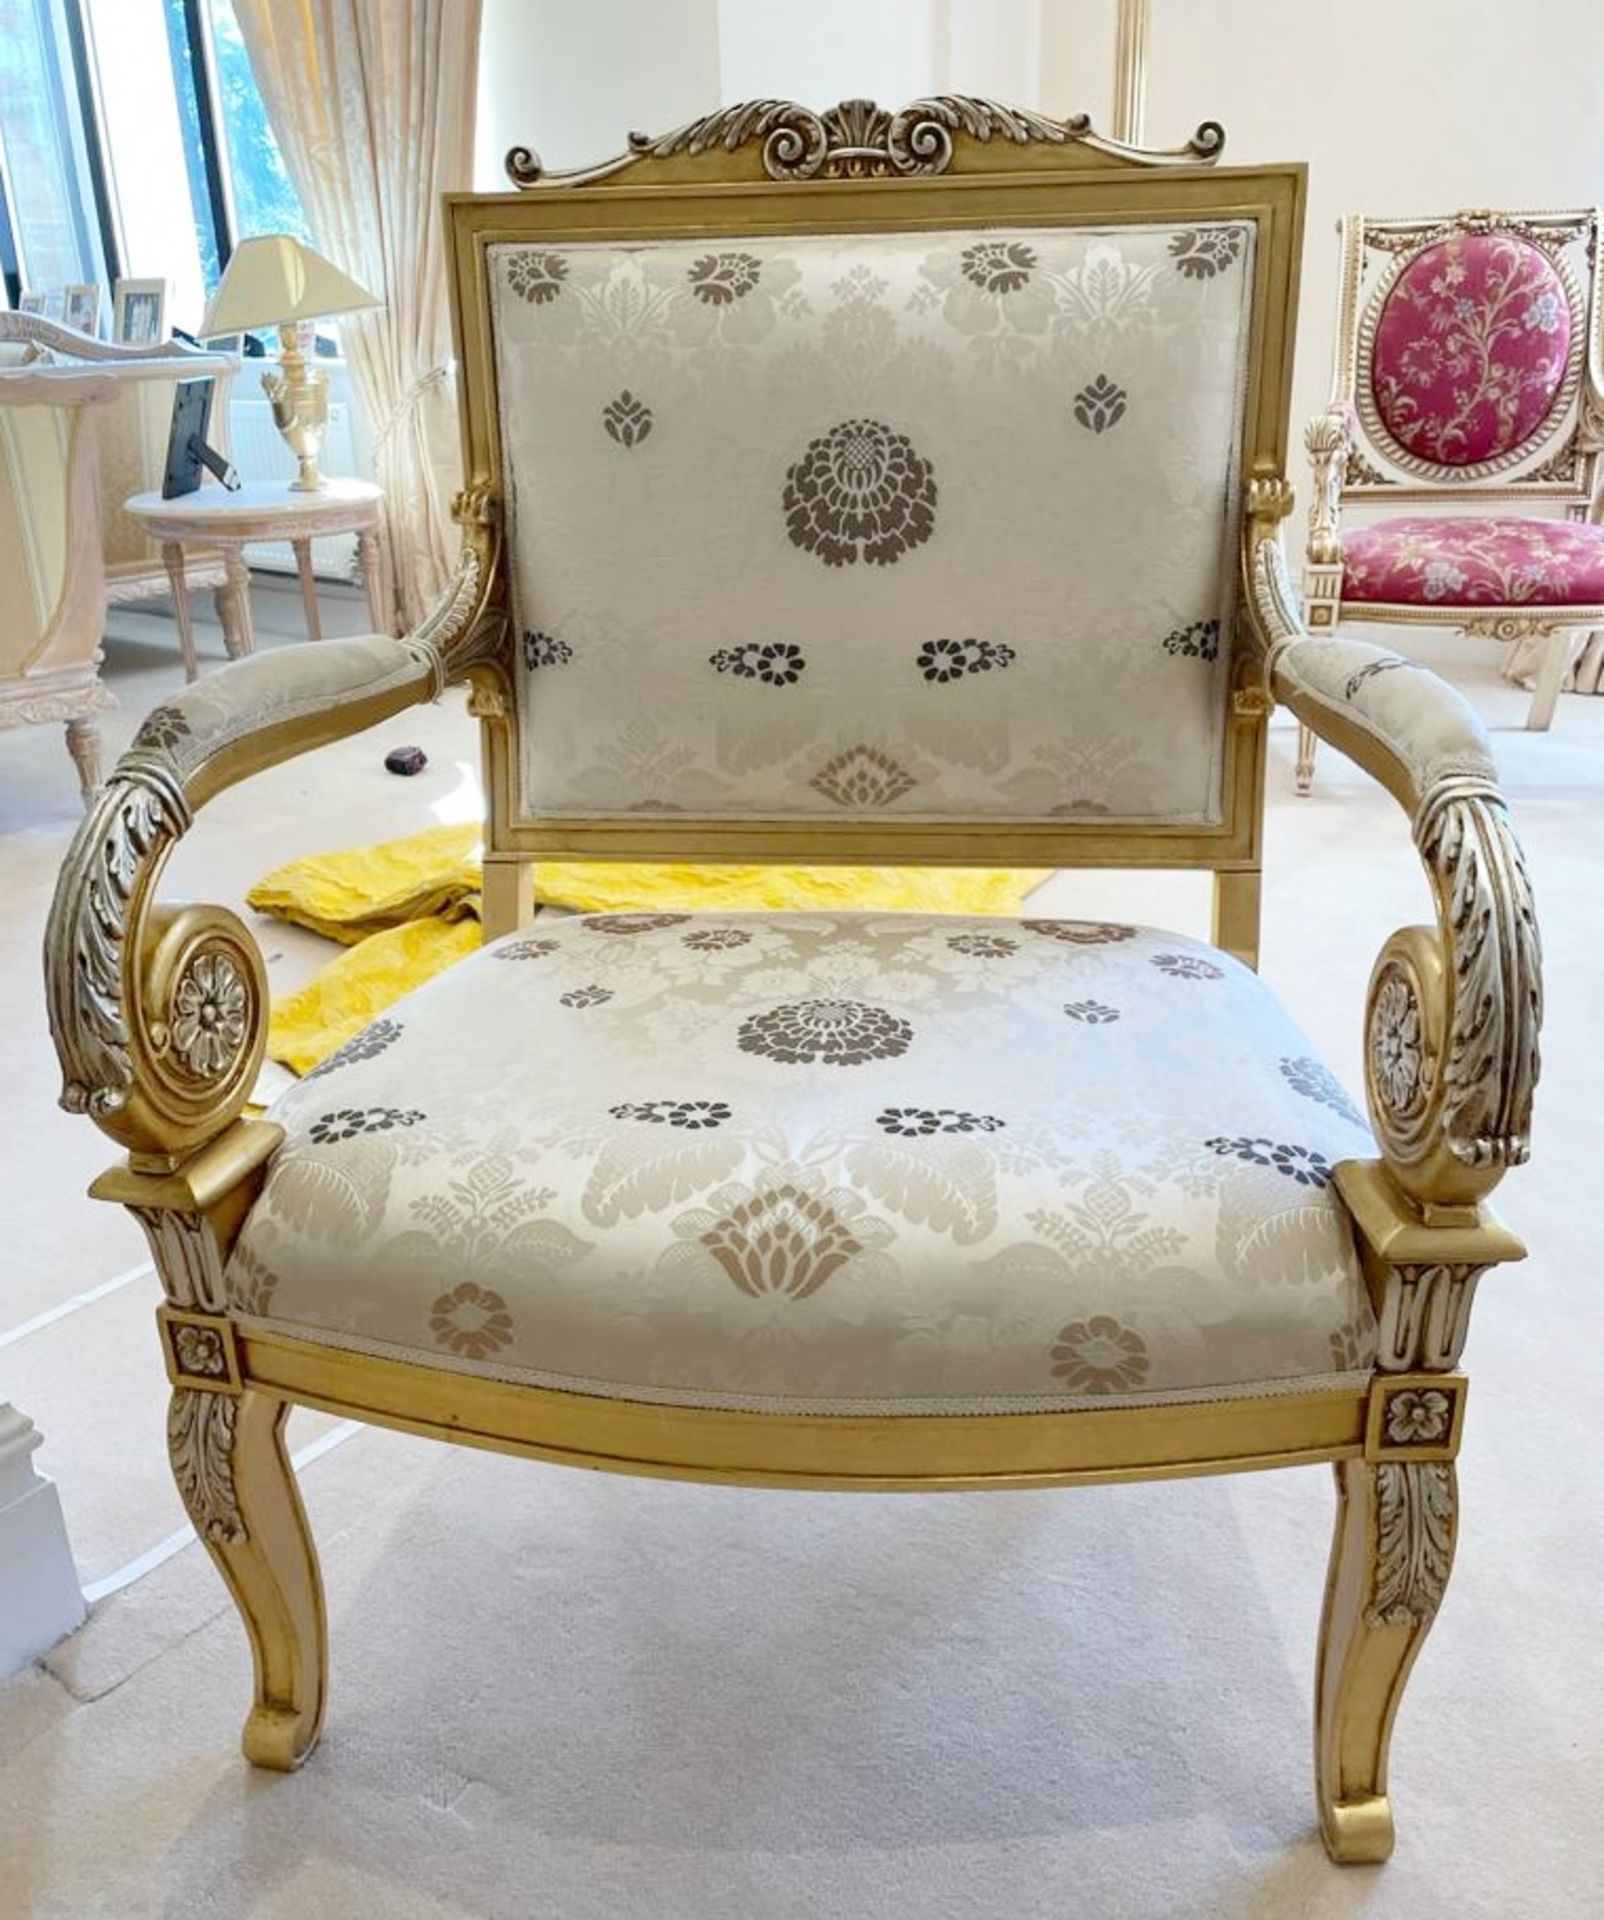 Pair of Scroll Arm Side Chair With Beautiful Carving and Bespoke Upholstery - Size: H105/46 x W75  x - Image 21 of 25